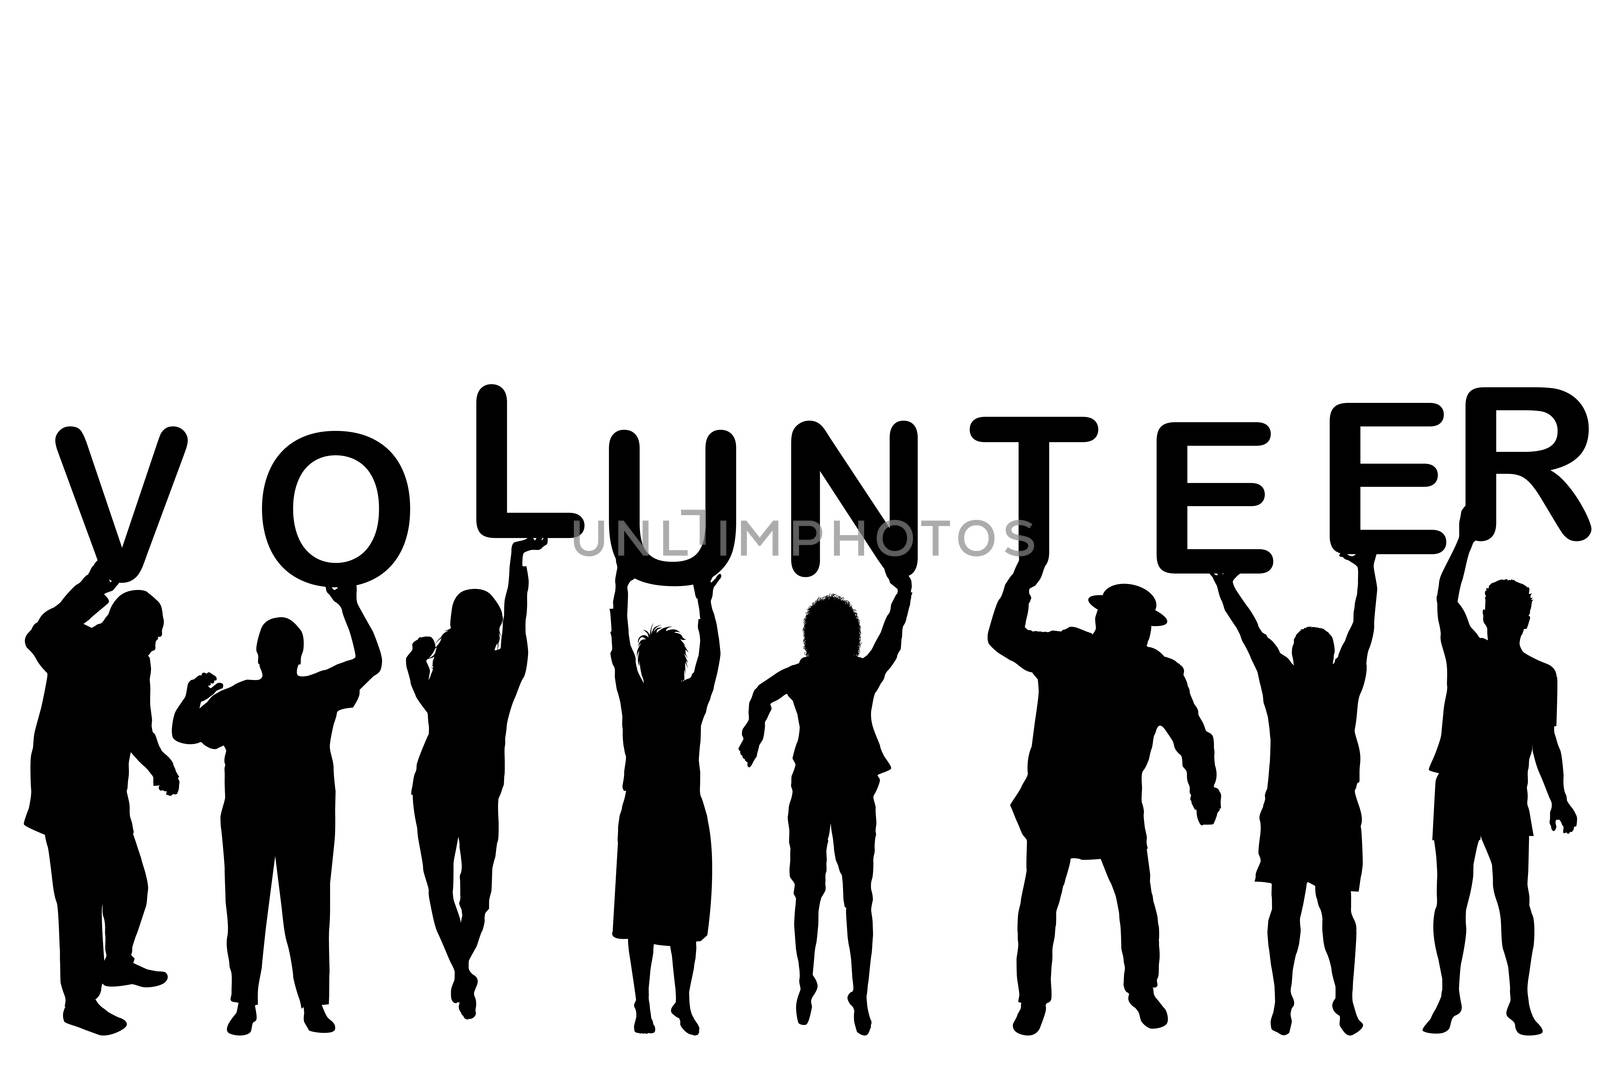 Volunteer concept with people silhouettes by hibrida13